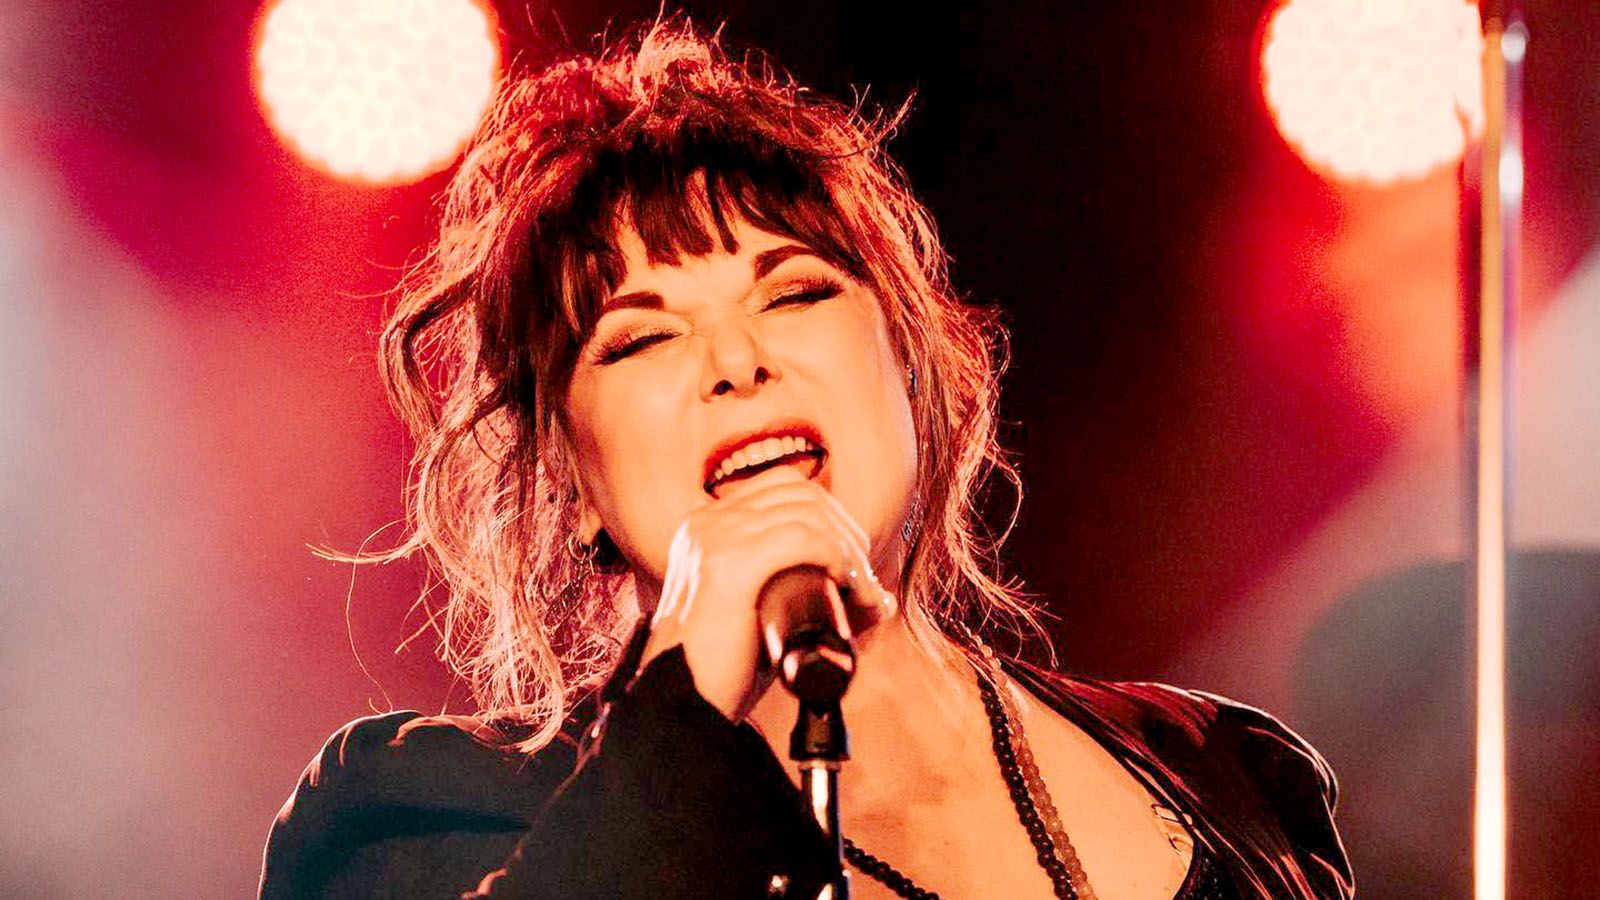 Ann Wilson & Tripsitter will stop by The Clyde Theatre on Tuesday, Nov. 28. Tickets go on sale Friday, Oct. 6.